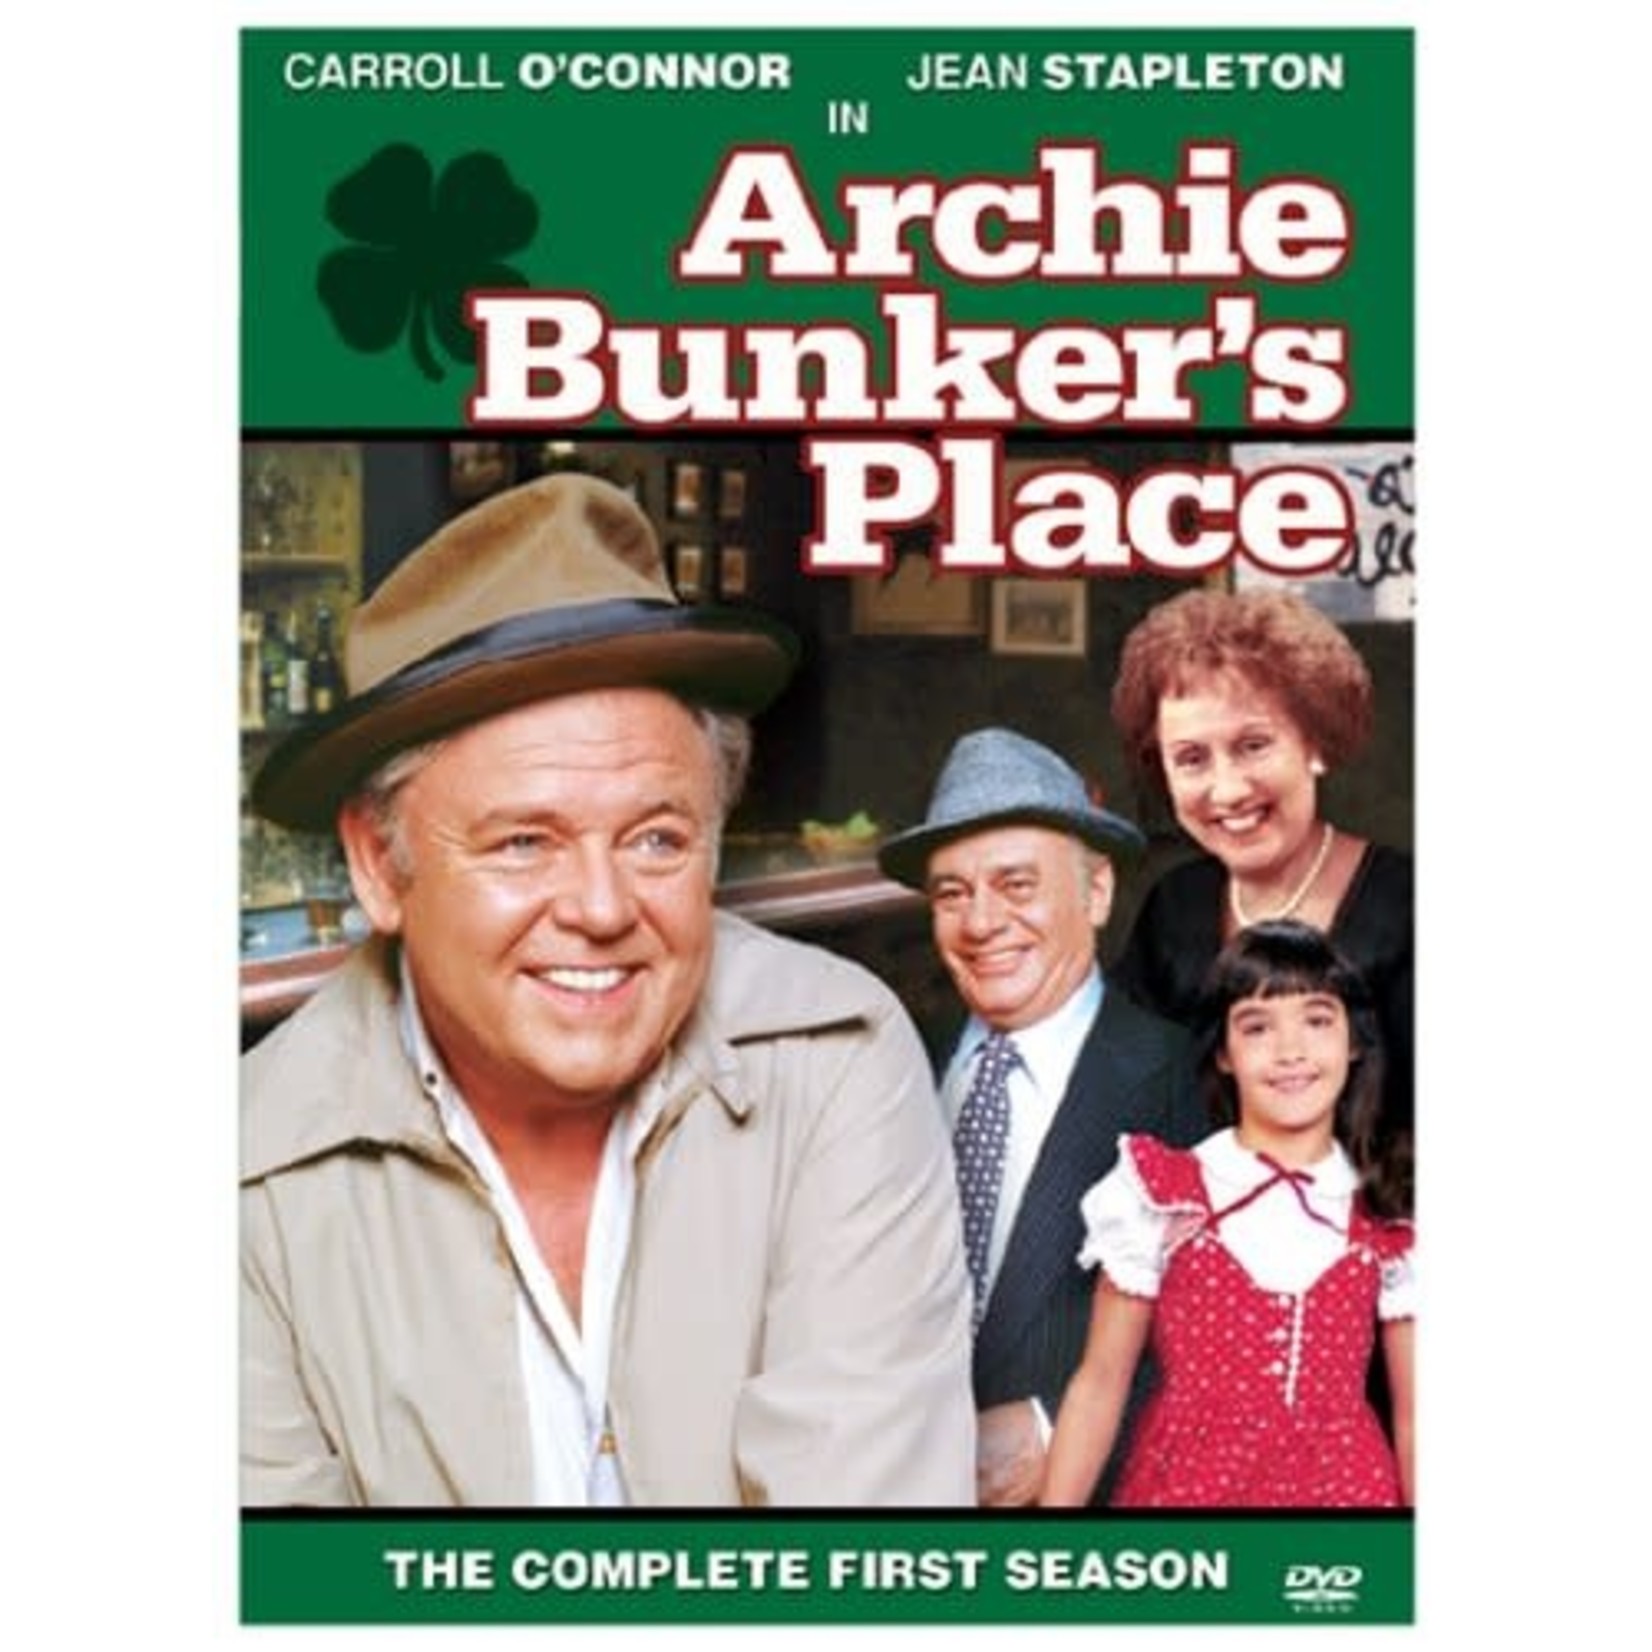 Archie Bunker's Place - Season 1 [USED DVD]